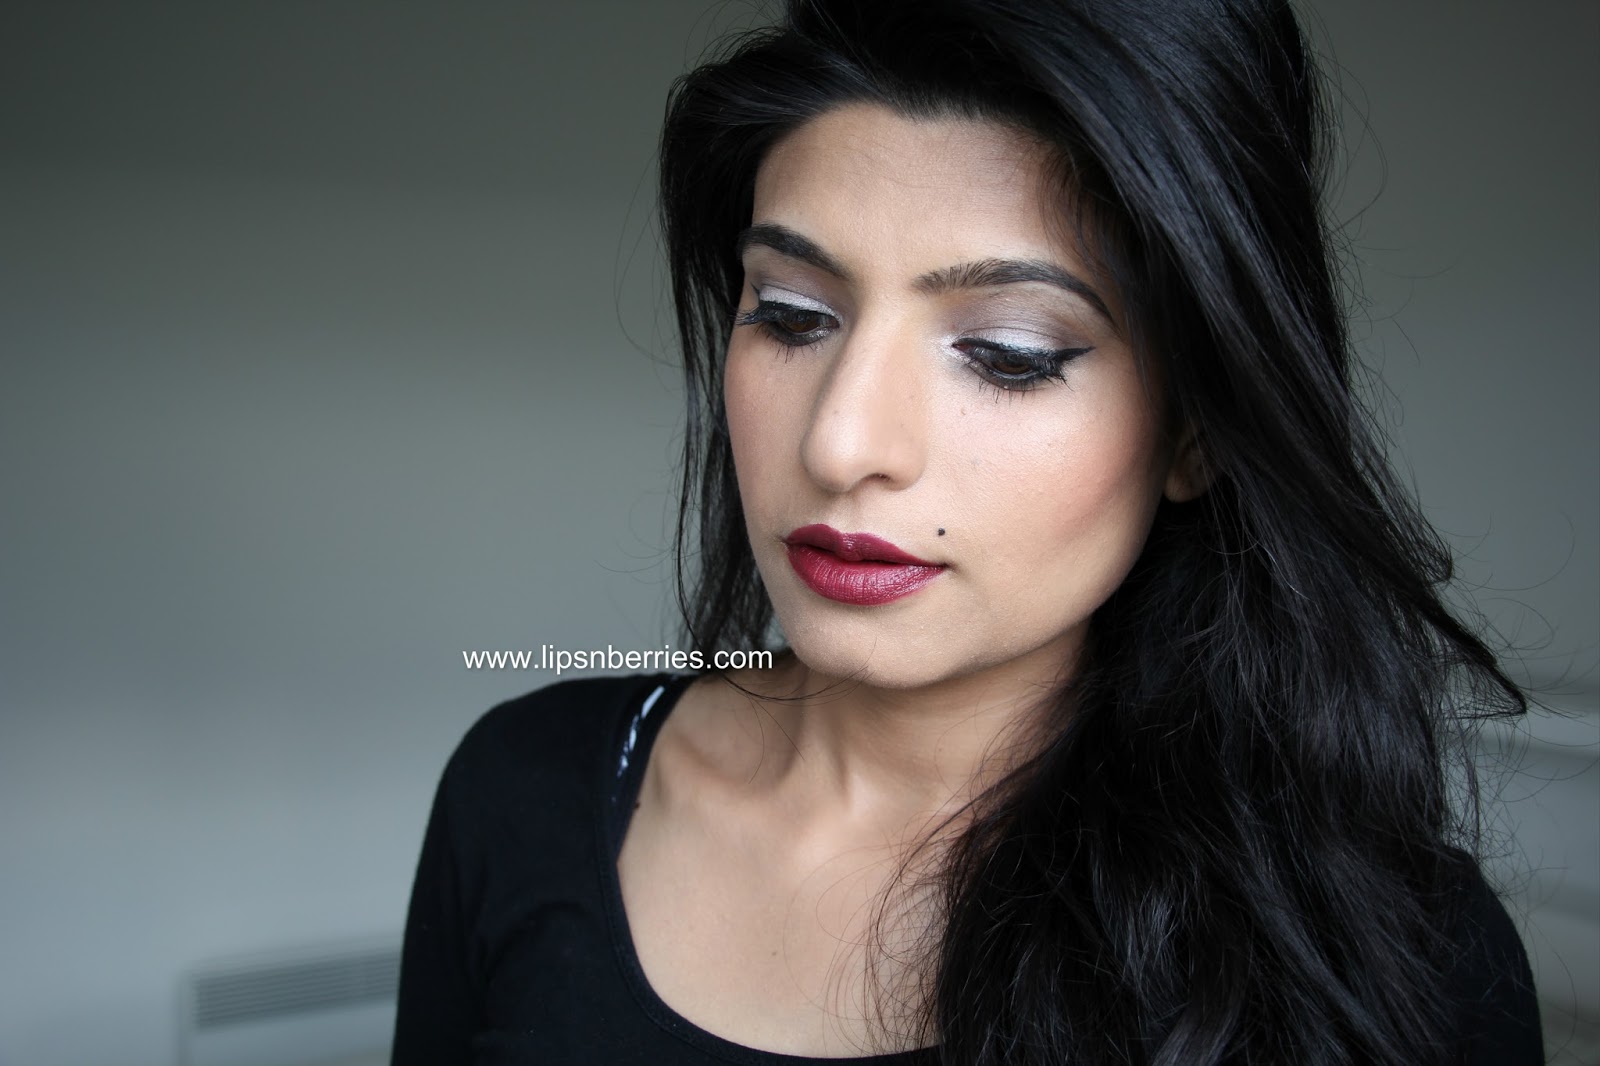 Lipstick in Dark Side- Quick Review + tons of photos! | LIPS n BERRIES